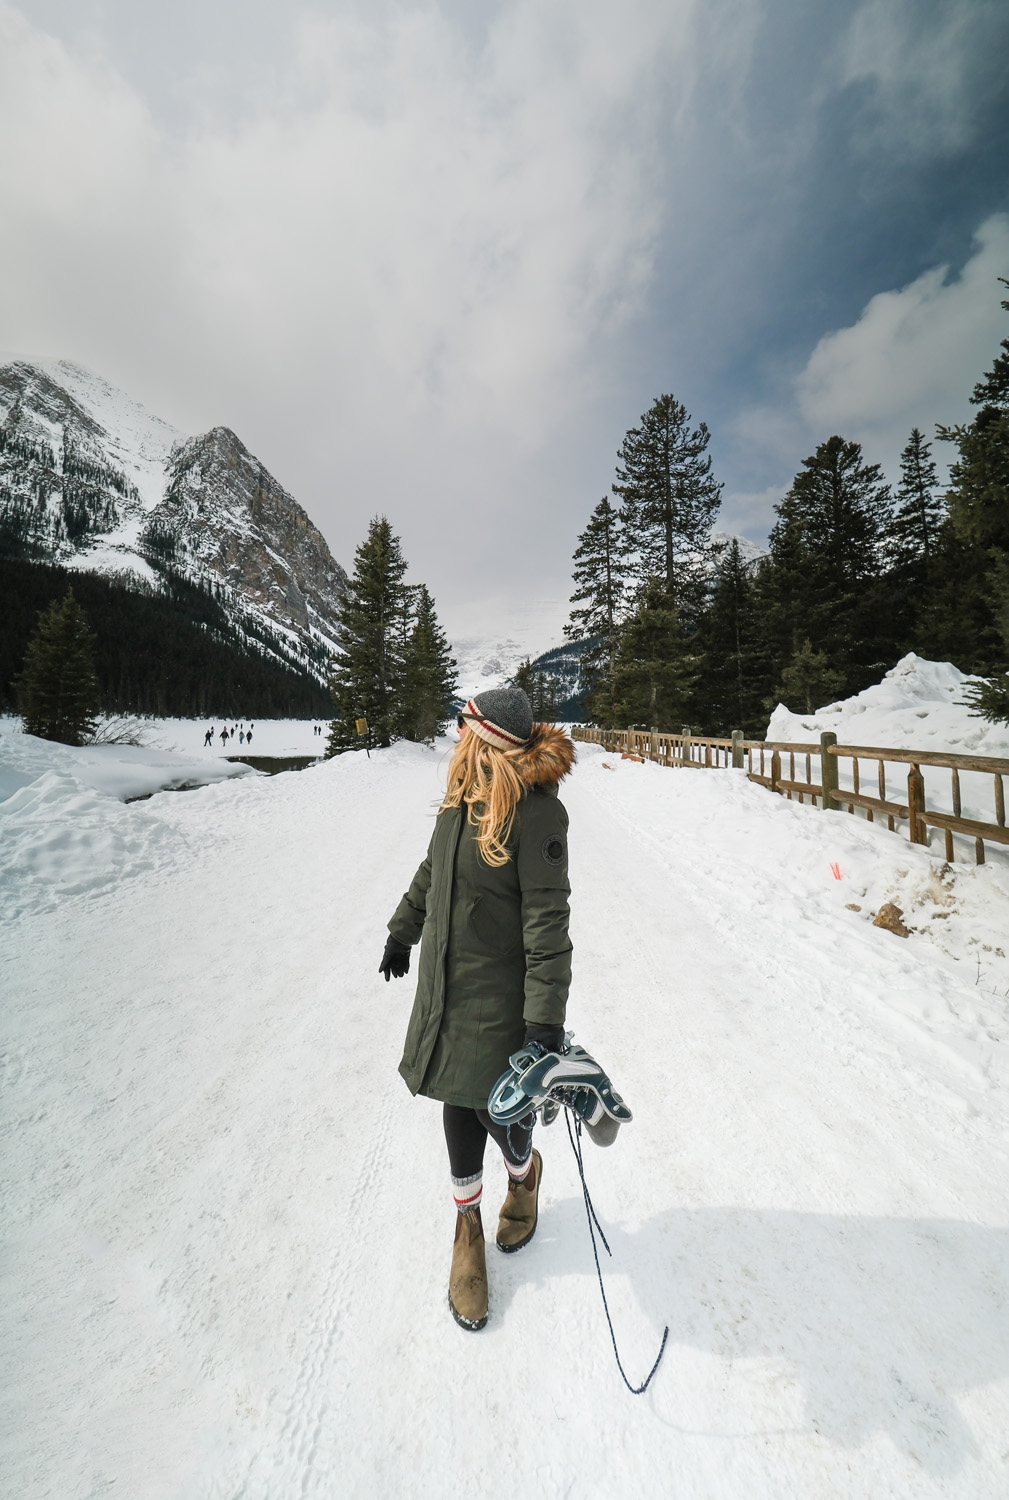 Girl in winter coat walks towards camera on snowy track with trees and mountains in background